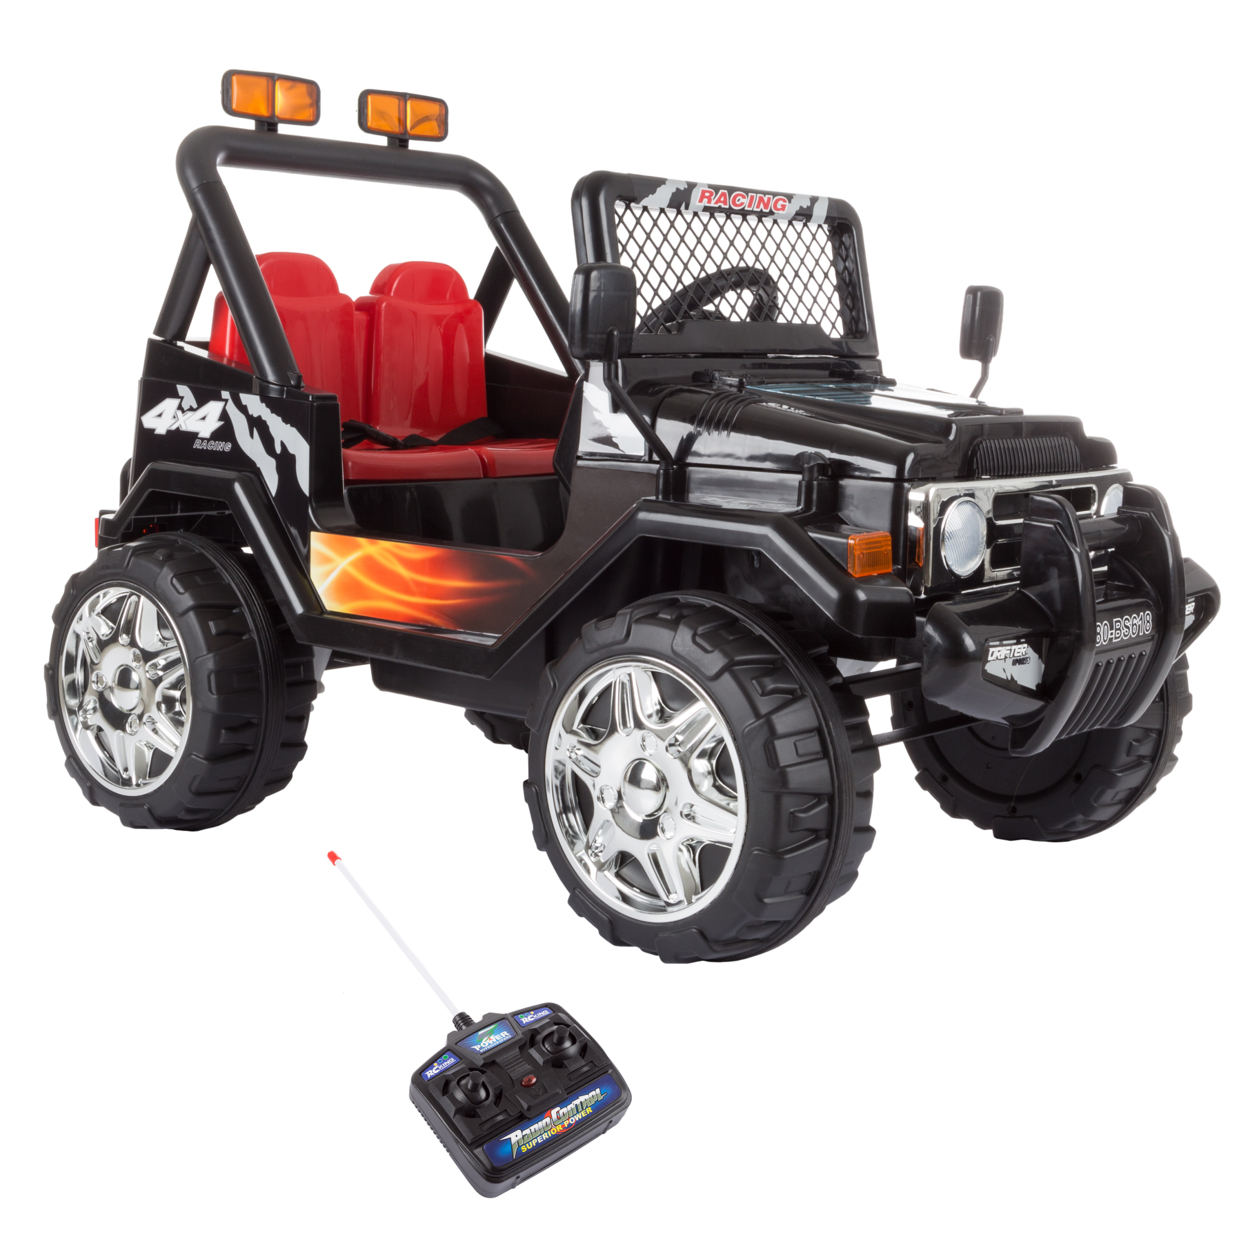 Lil' Rider All Terrain 4 Wheeler Ride on Toy with Remote Rechargeable Battery Operated Car